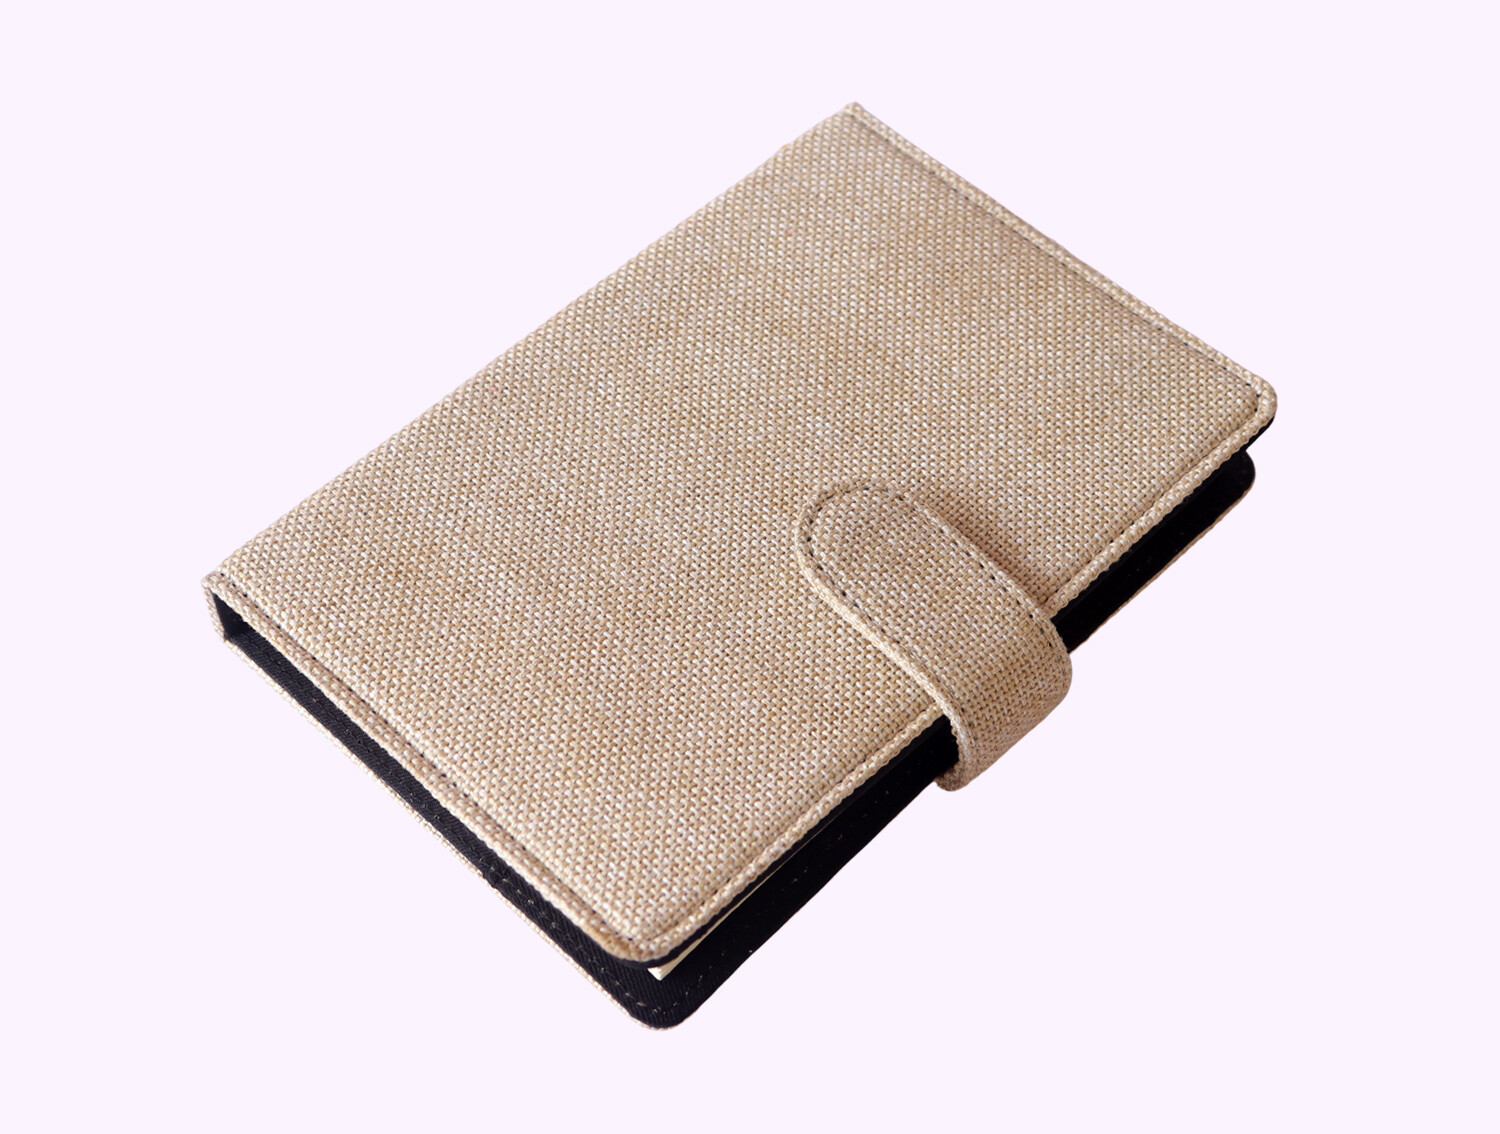 Handmade diary with Jute cover